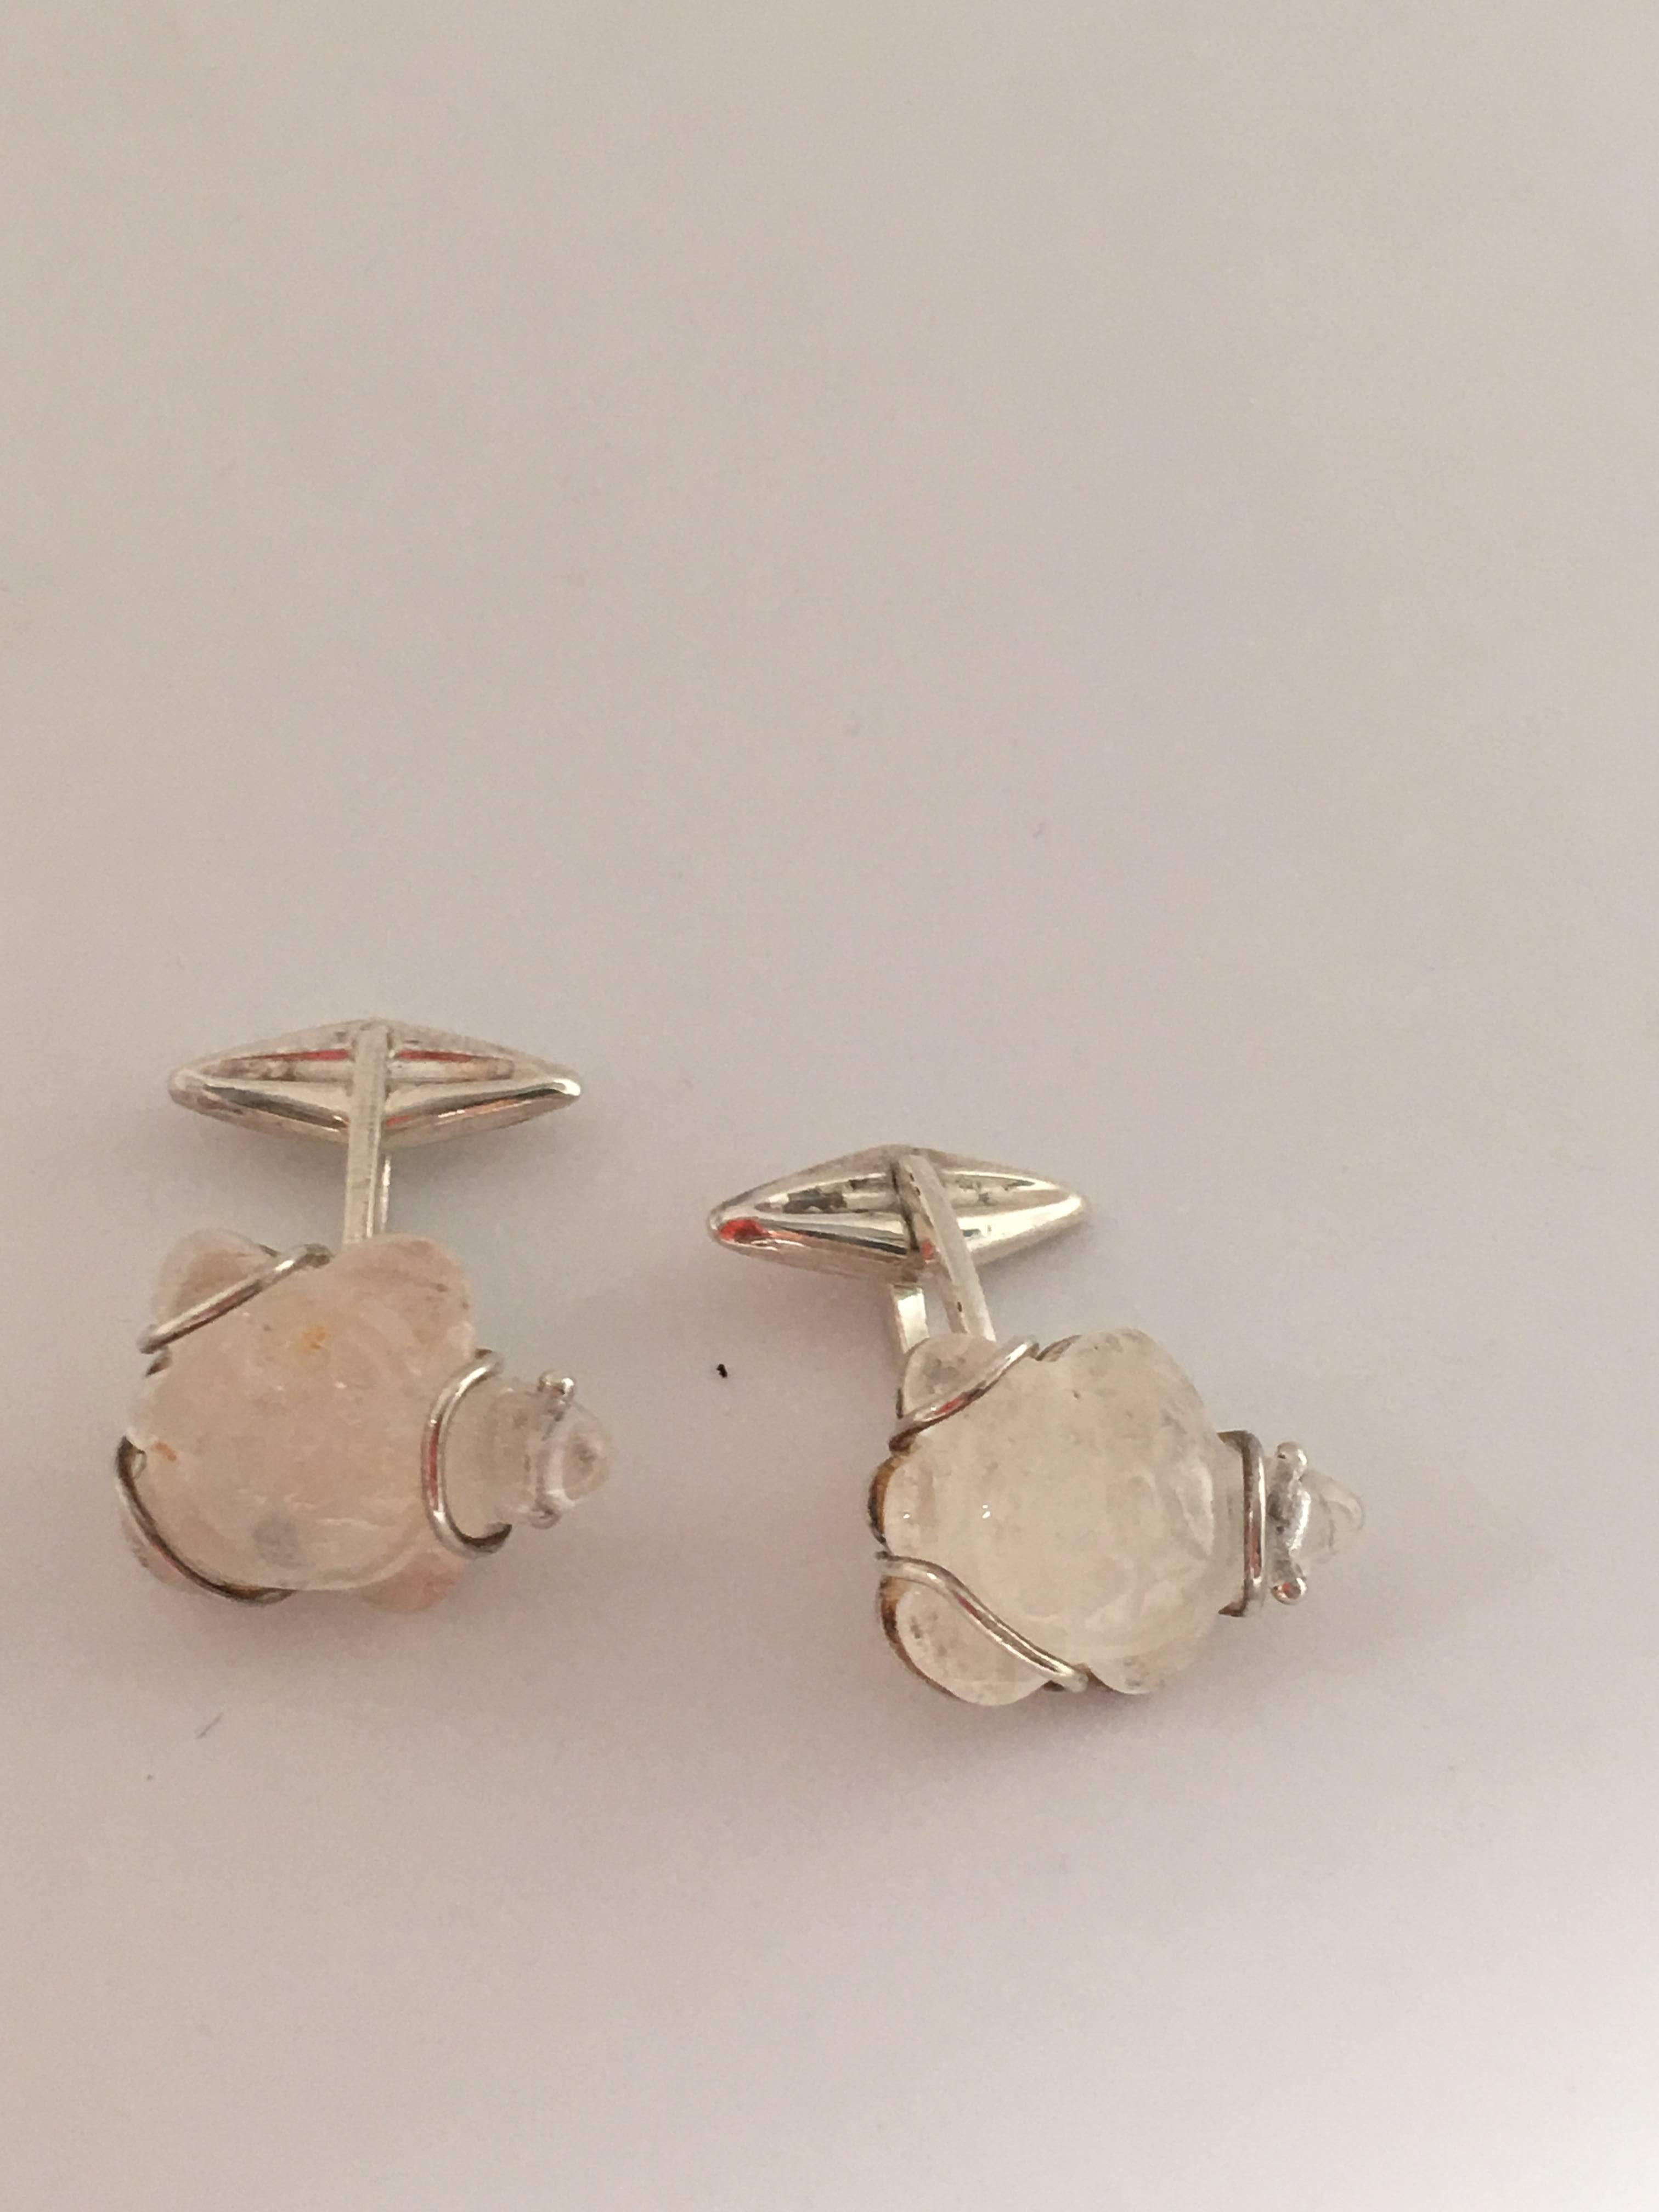 Very nice Cufflinks rock crystal and silver turtle shape.
All Giulia Colussi jewelry is new and has never been previously owned or worn. Each item will arrive at your door beautifully gift wrapped in our boxes, put inside an elegant pouch or jewel